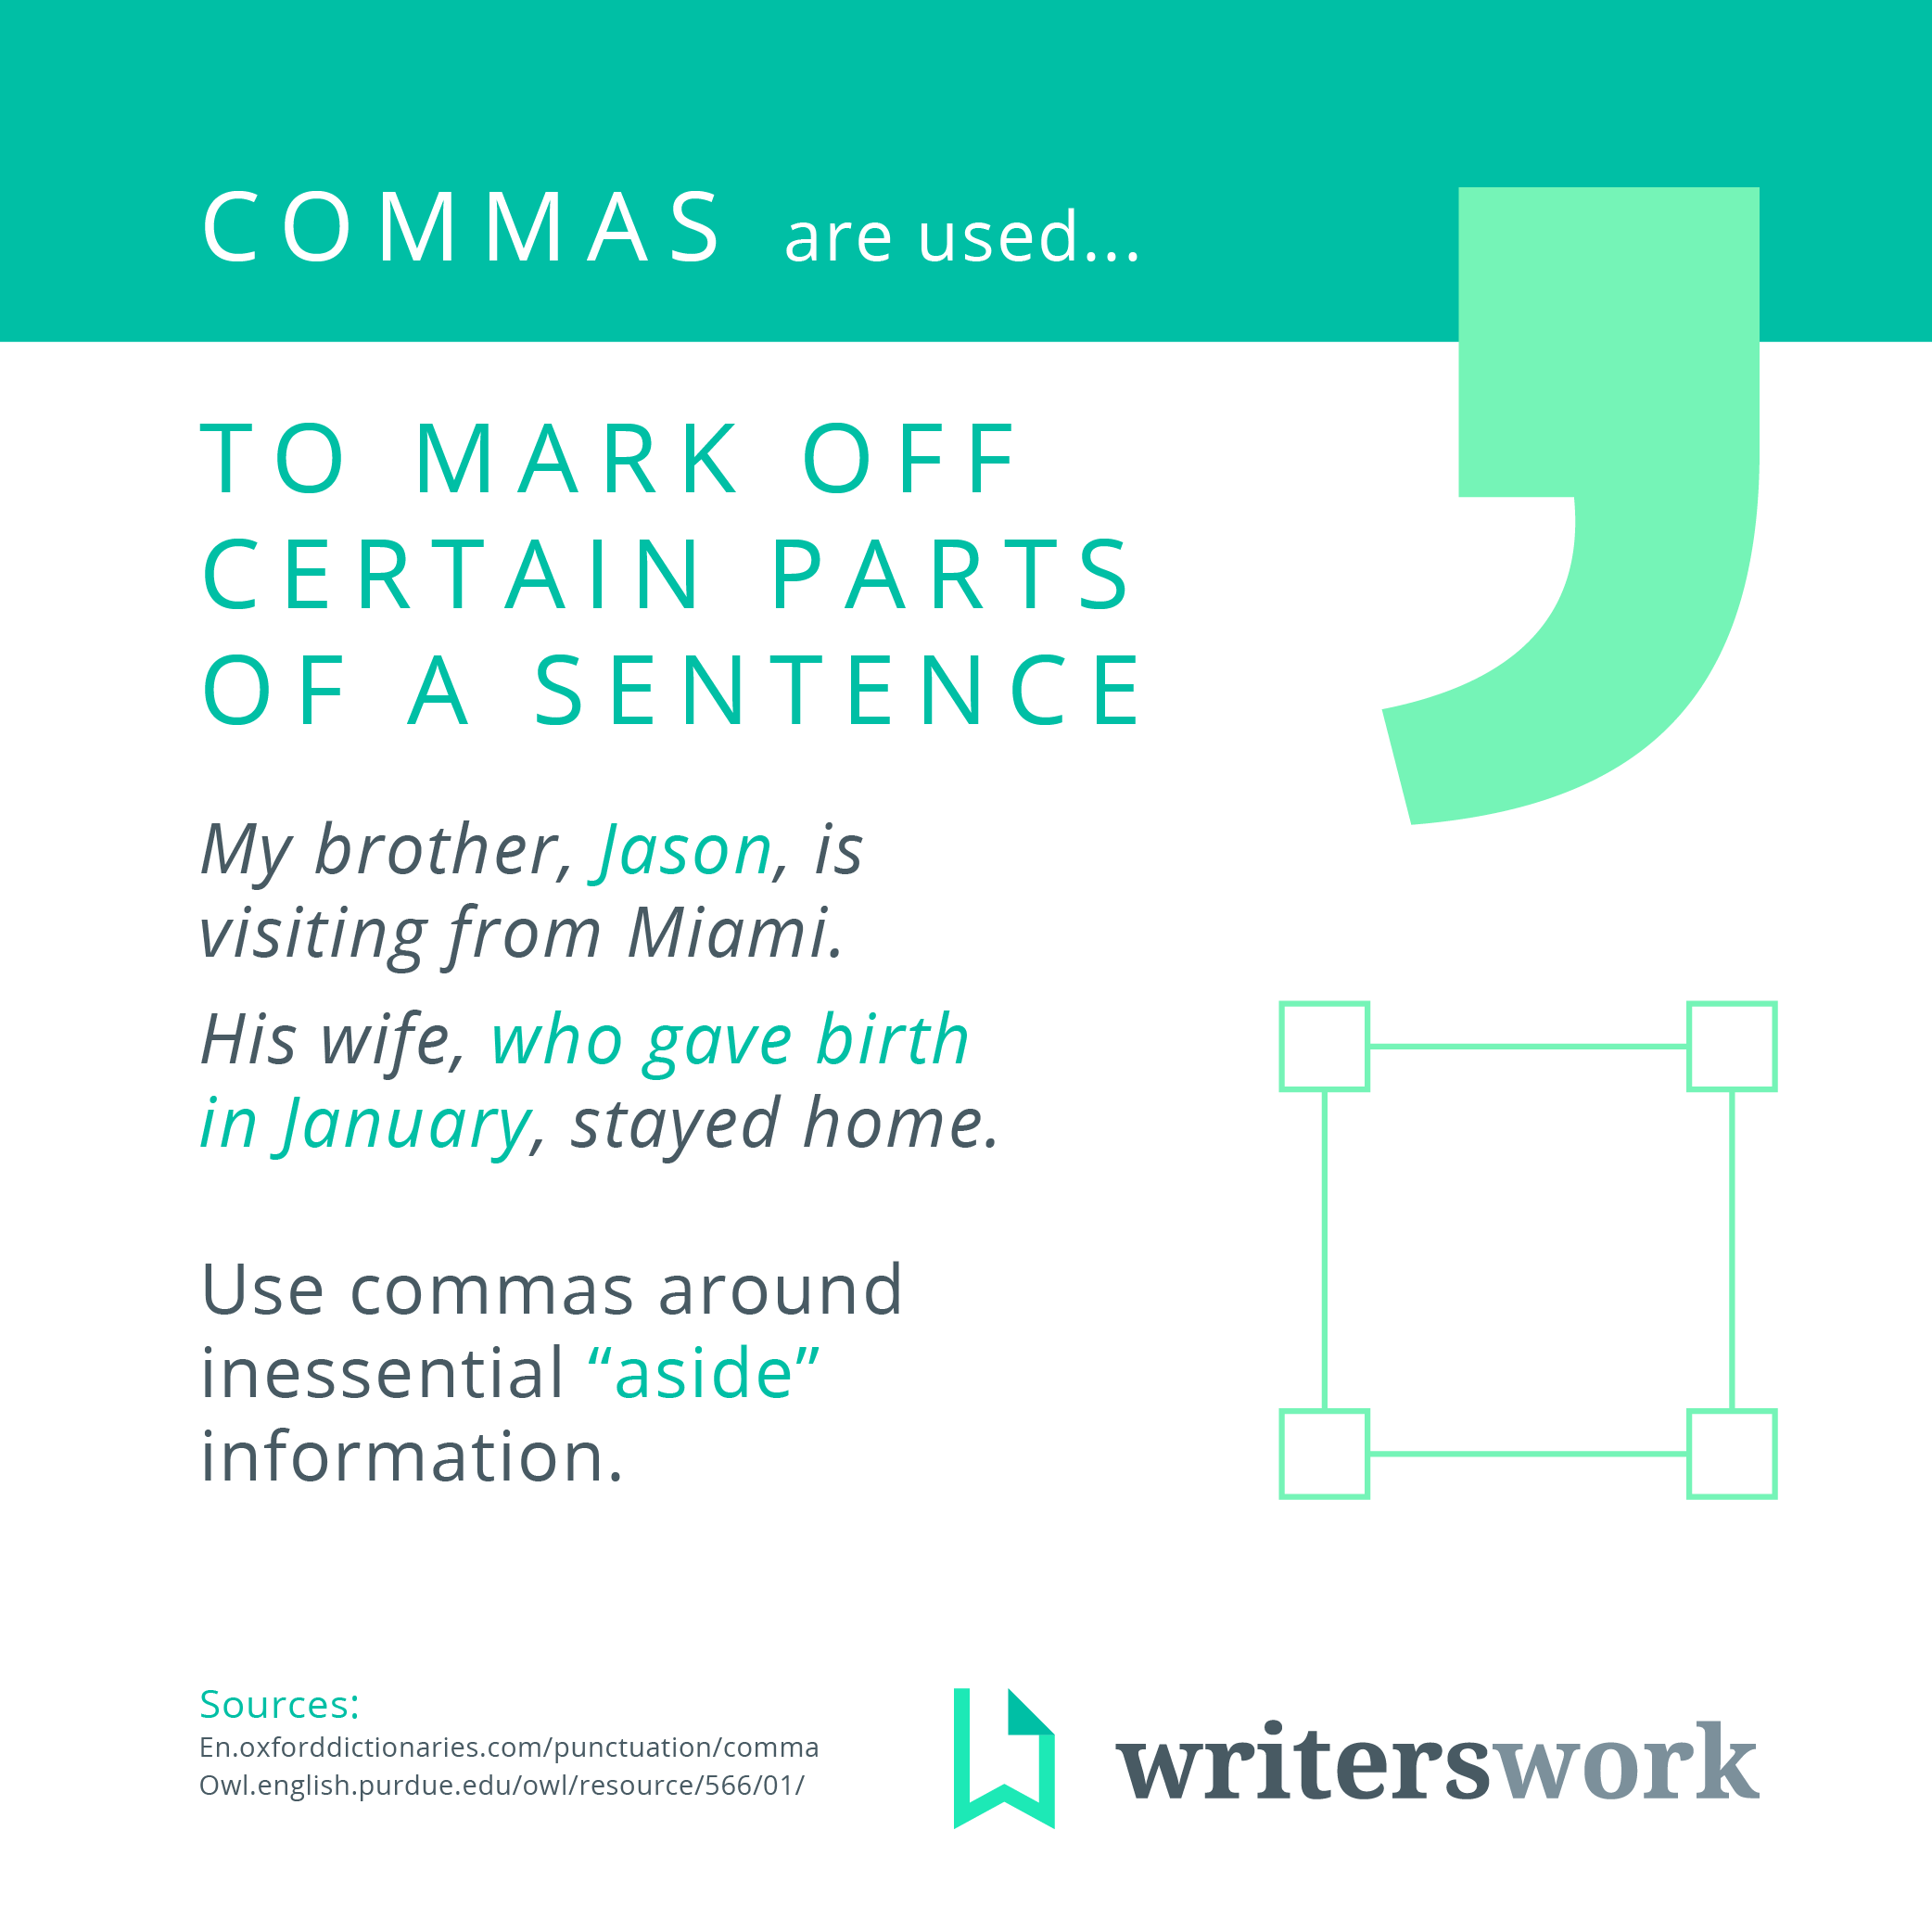 Commas are used to mark off certain parts of a sentence.